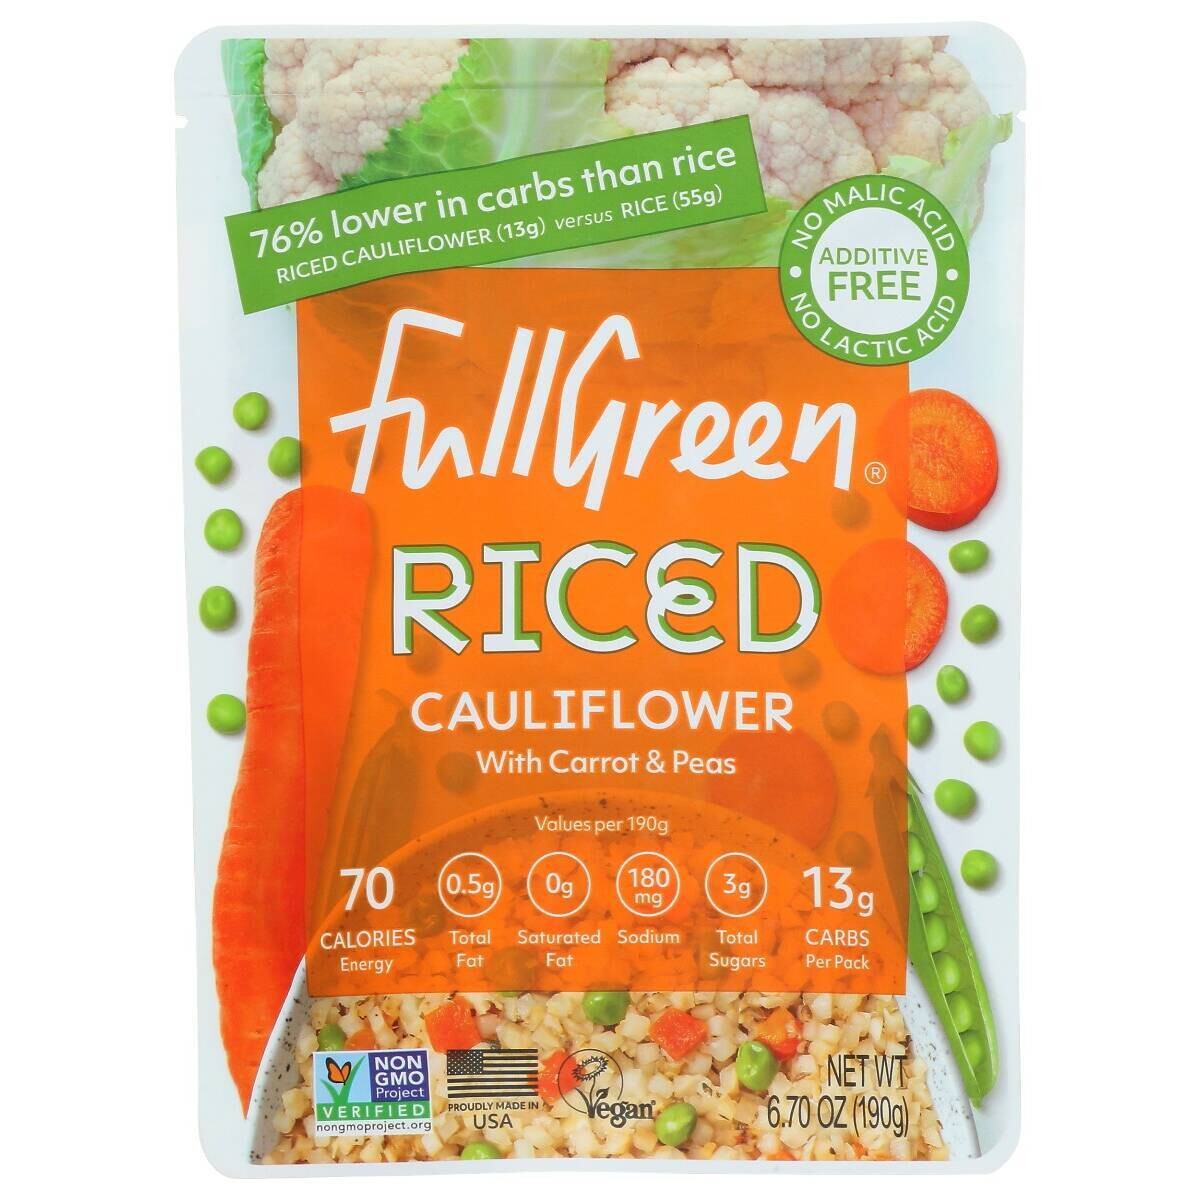 Fullgreen Riced Cauliflower with Carrots & Peas Microwavable Pouch